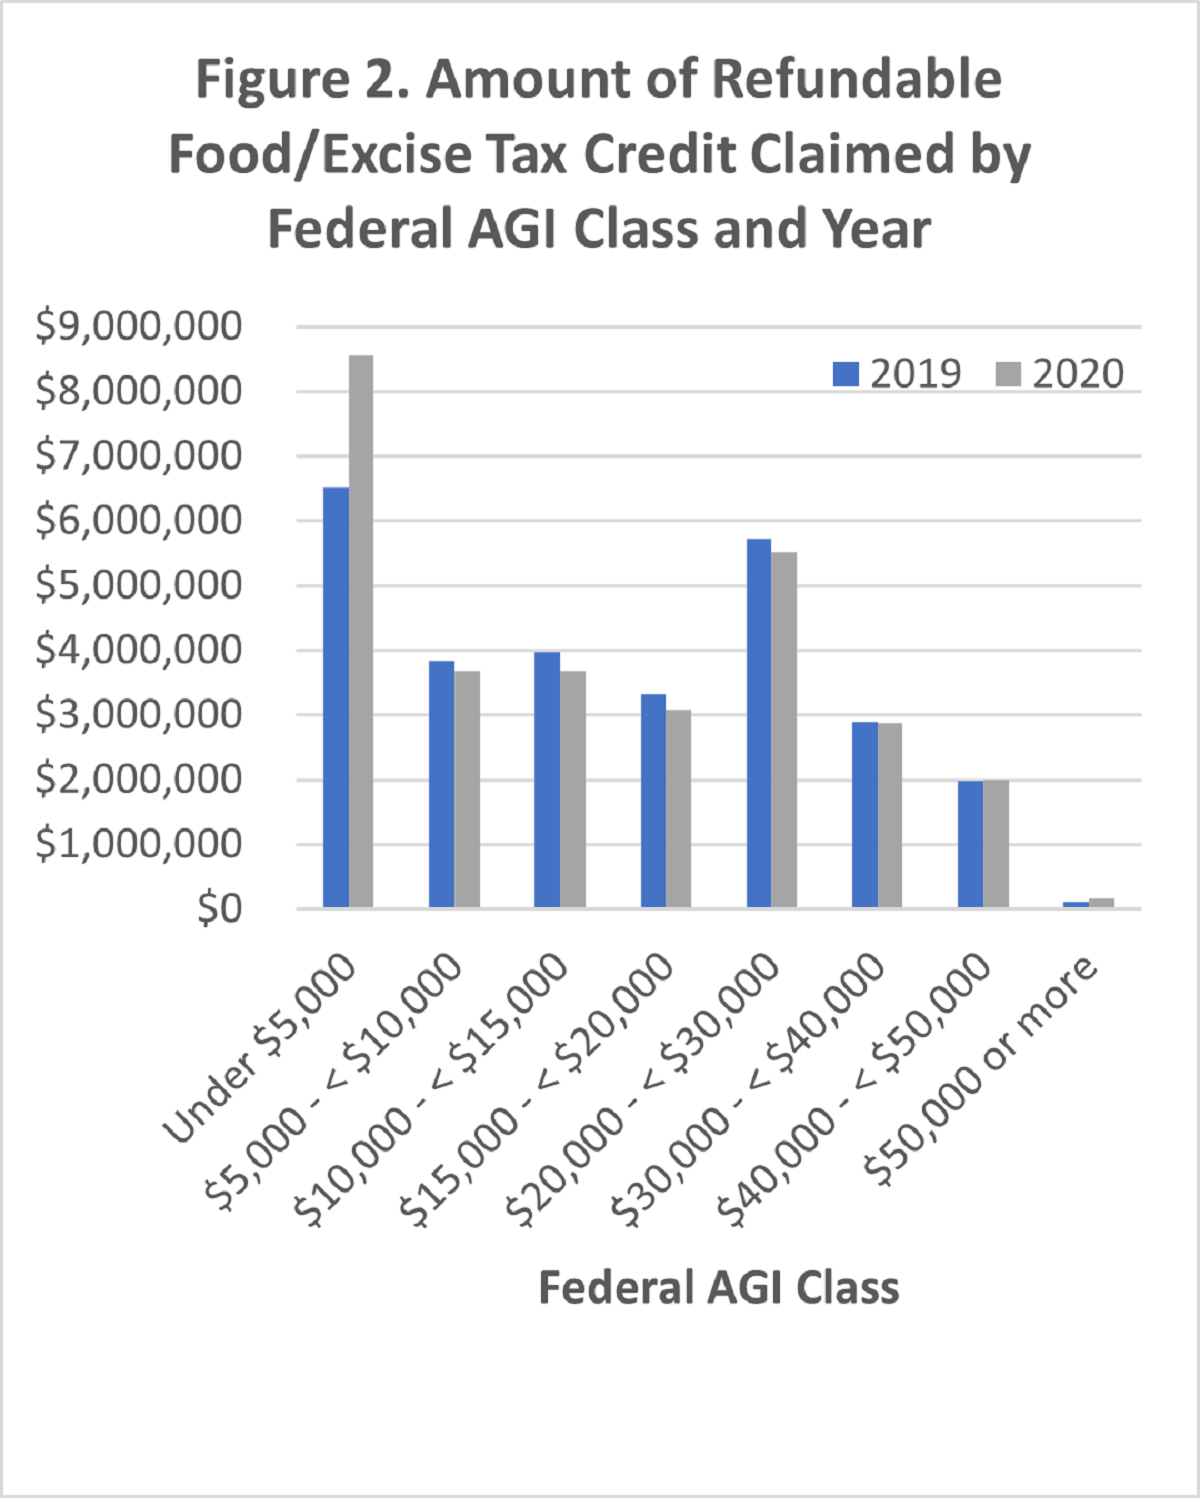 Figure 2: Amount of Refundable Food/Excise Tax Credit Claimed by Federal AGI Class and Year